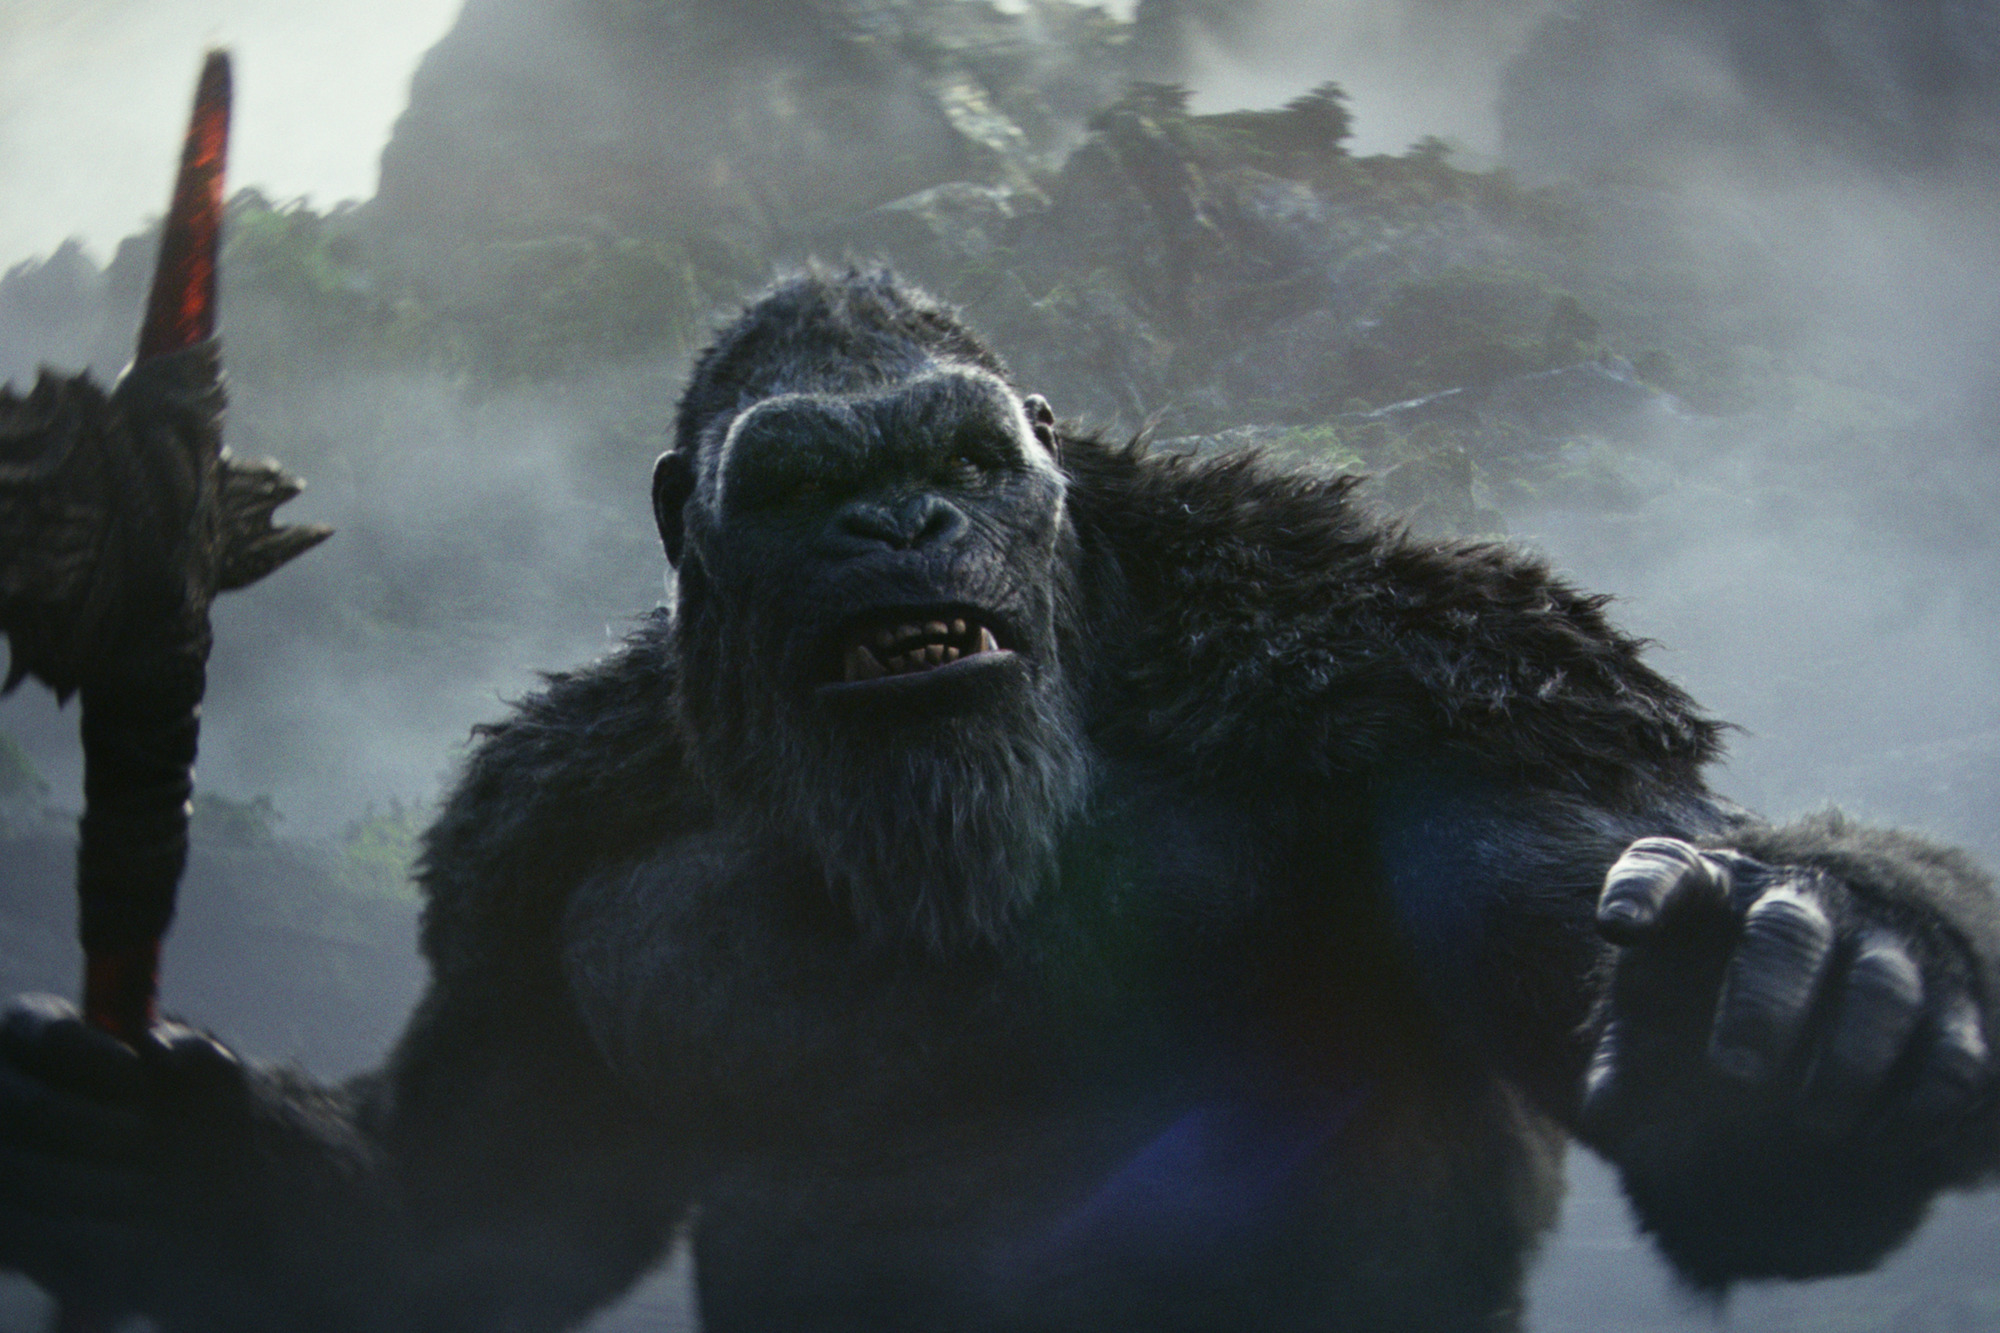 Friends Forever? Probably Not, Though New Godzilla x Kong Clip Shows Kong Riding the Kaiju [Video]